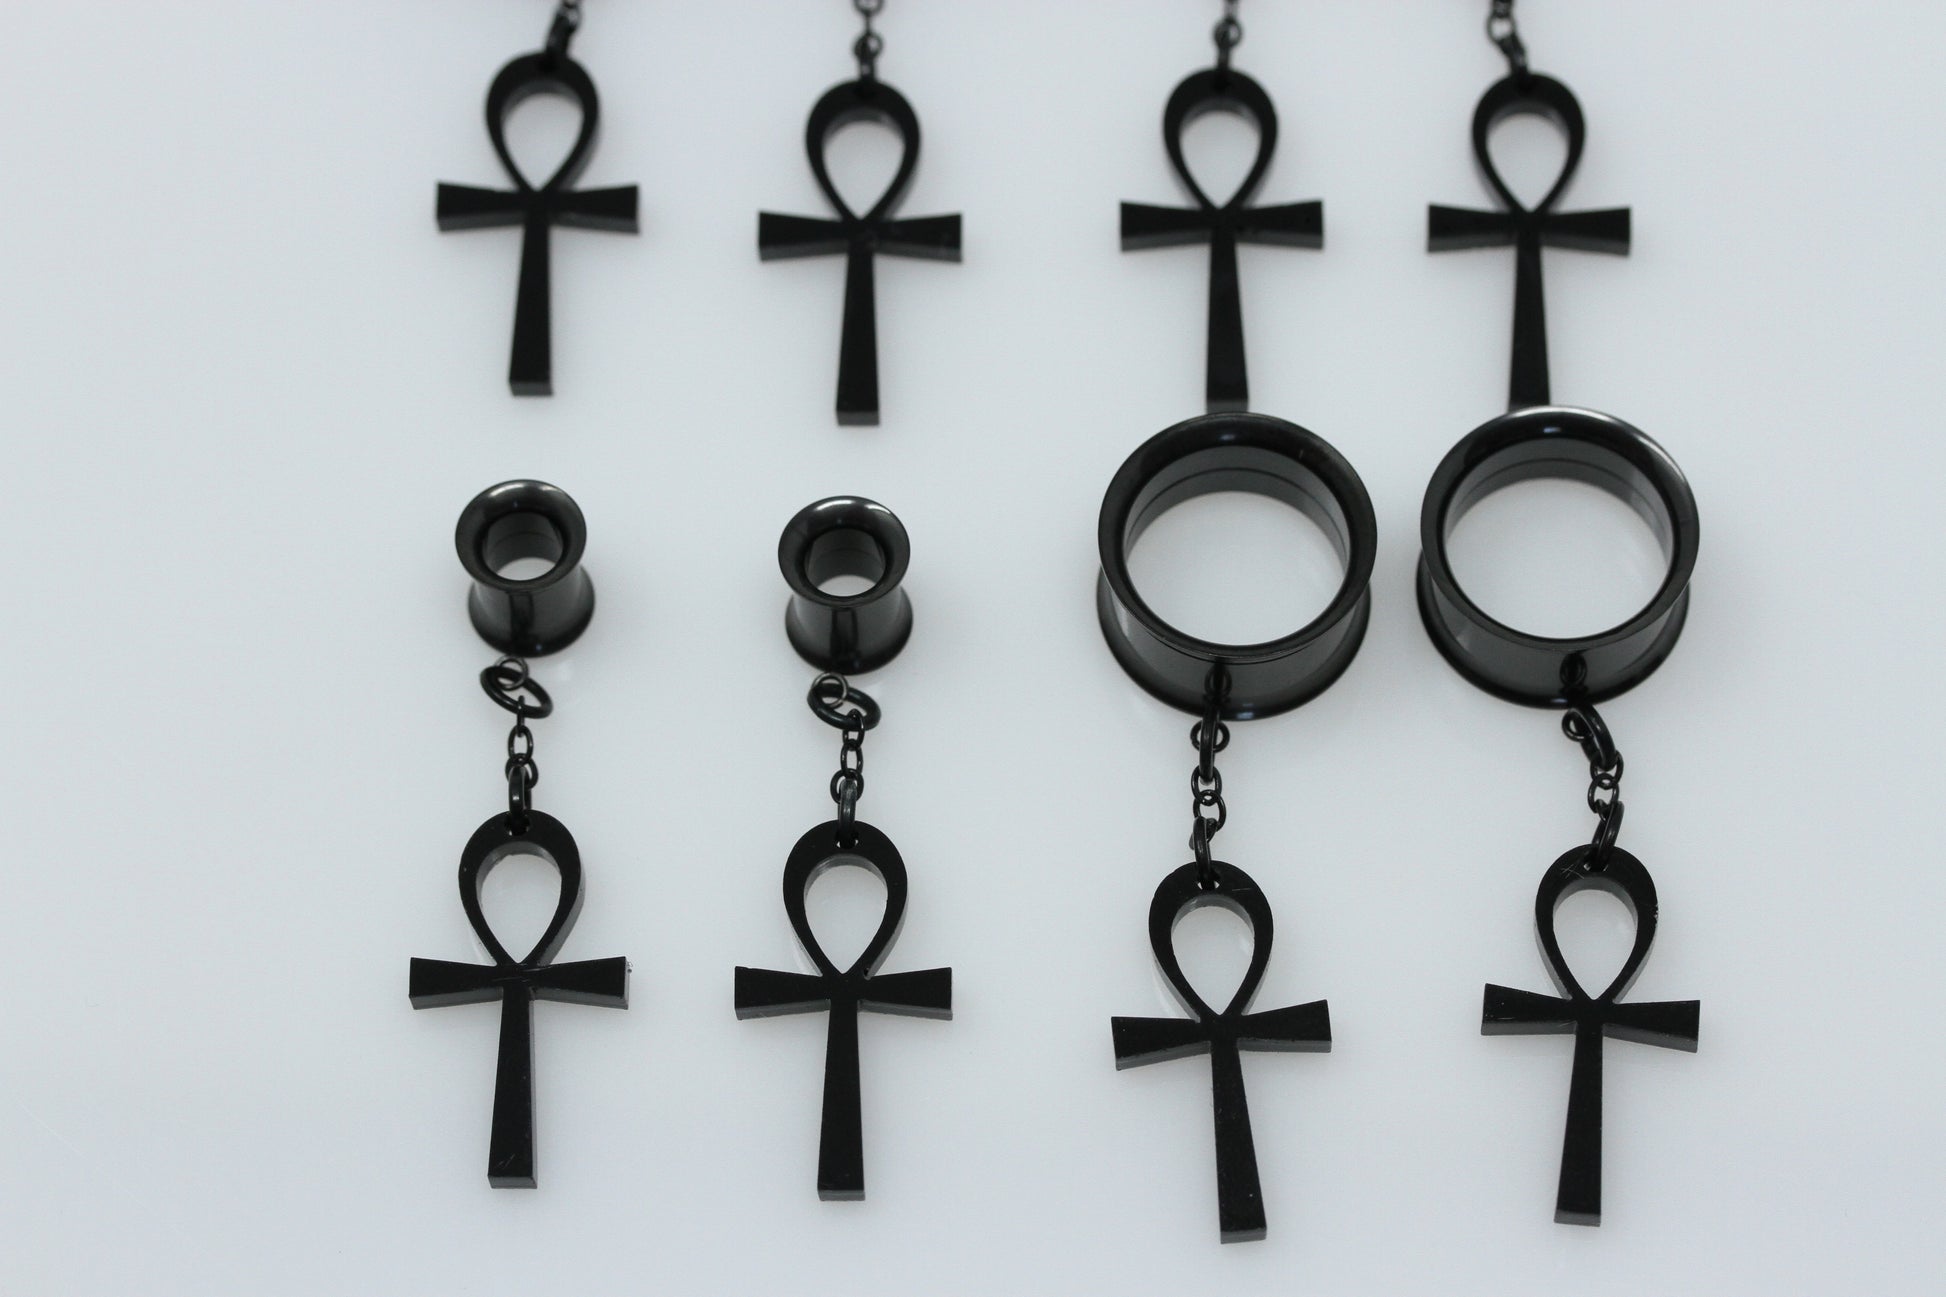 Dangler ankh stretched ears